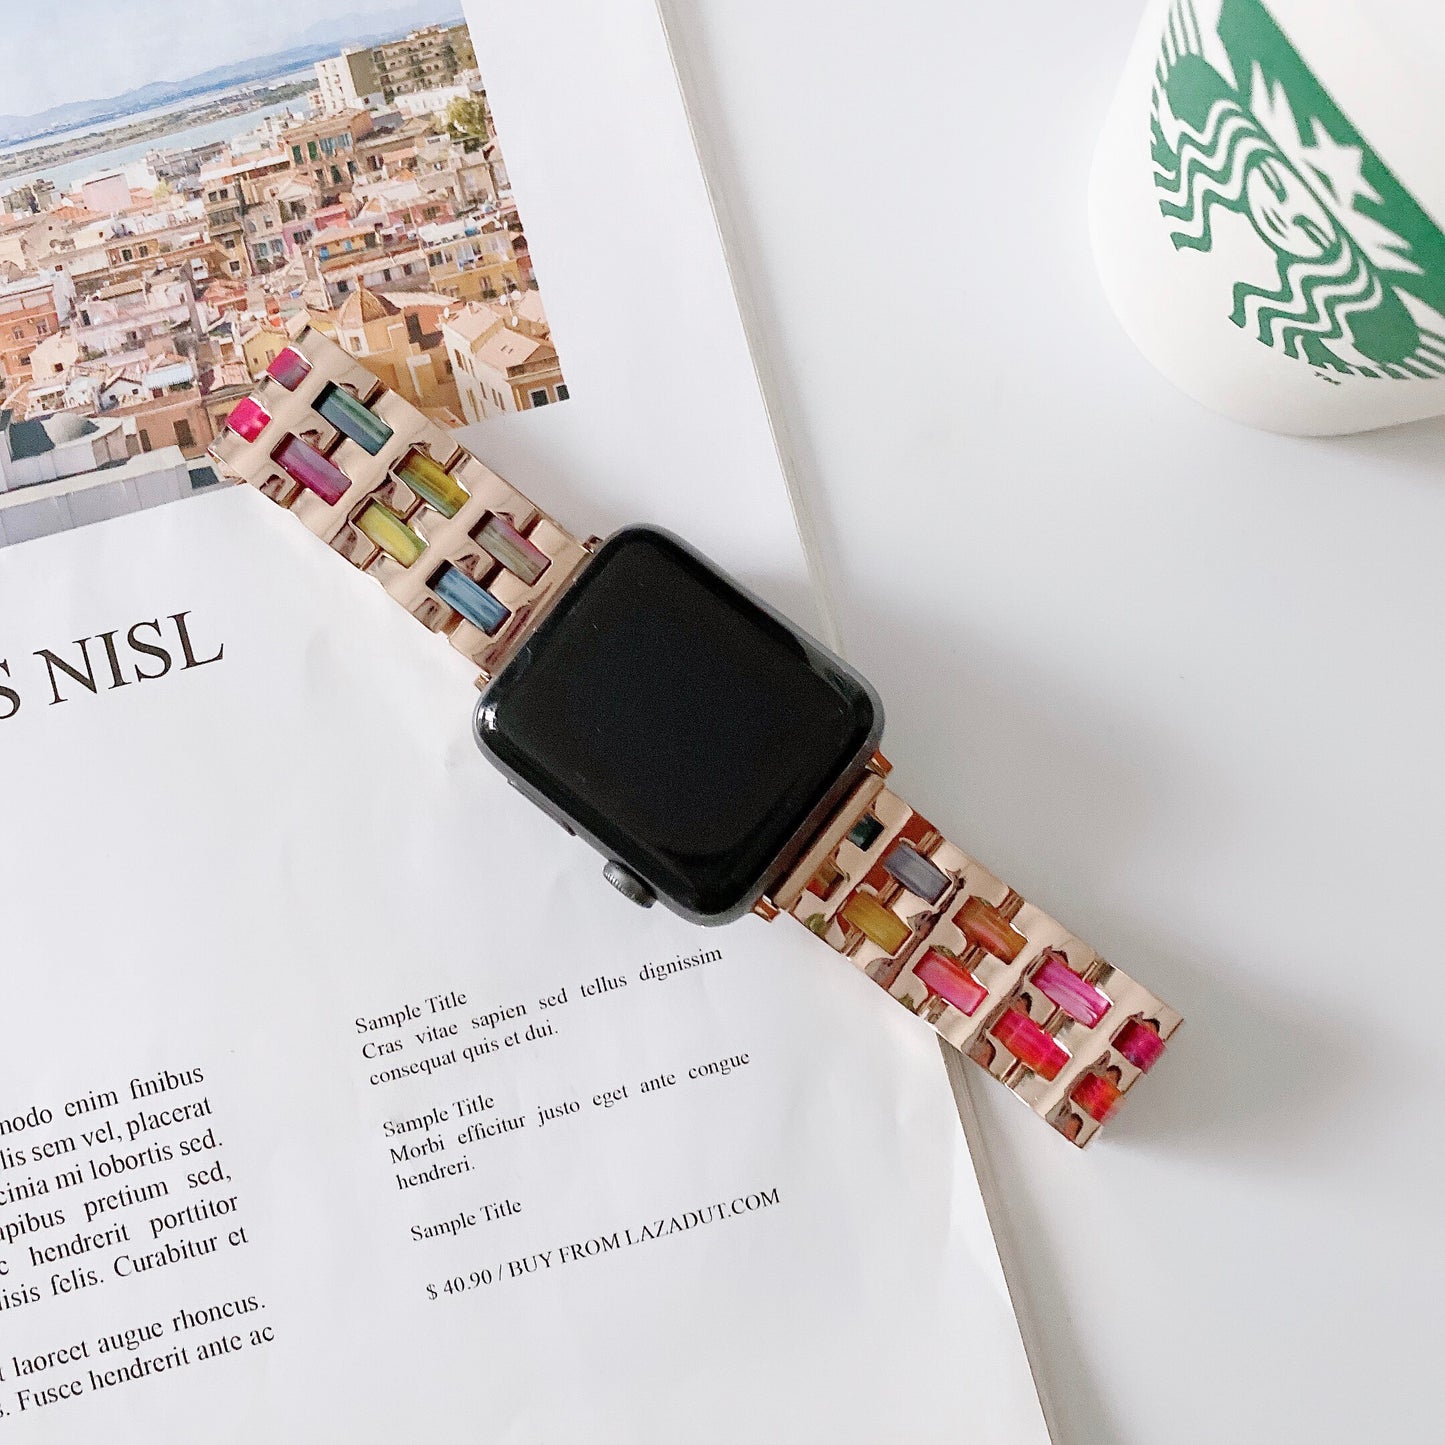 Resin & Stainless Steel Apple Watch Band